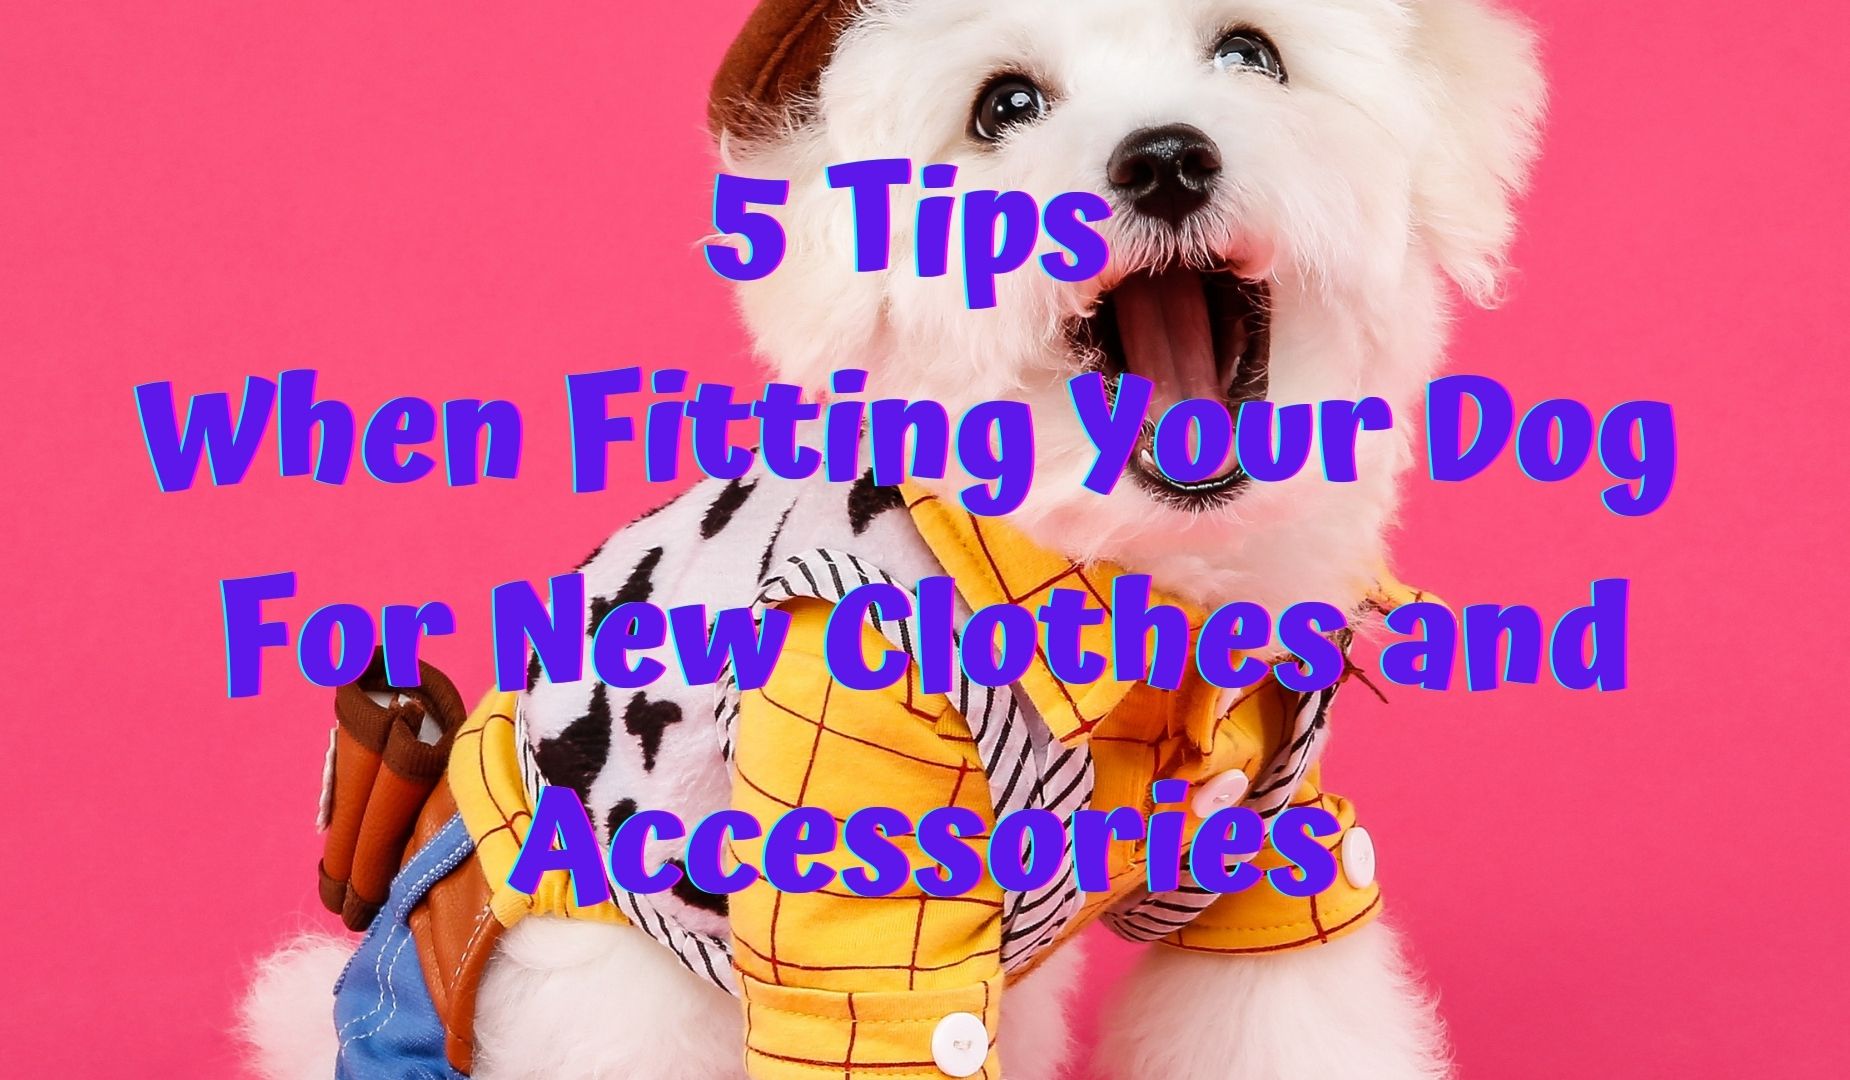 5 Tips When Fitting Your Dog For New Clothes and Accessories